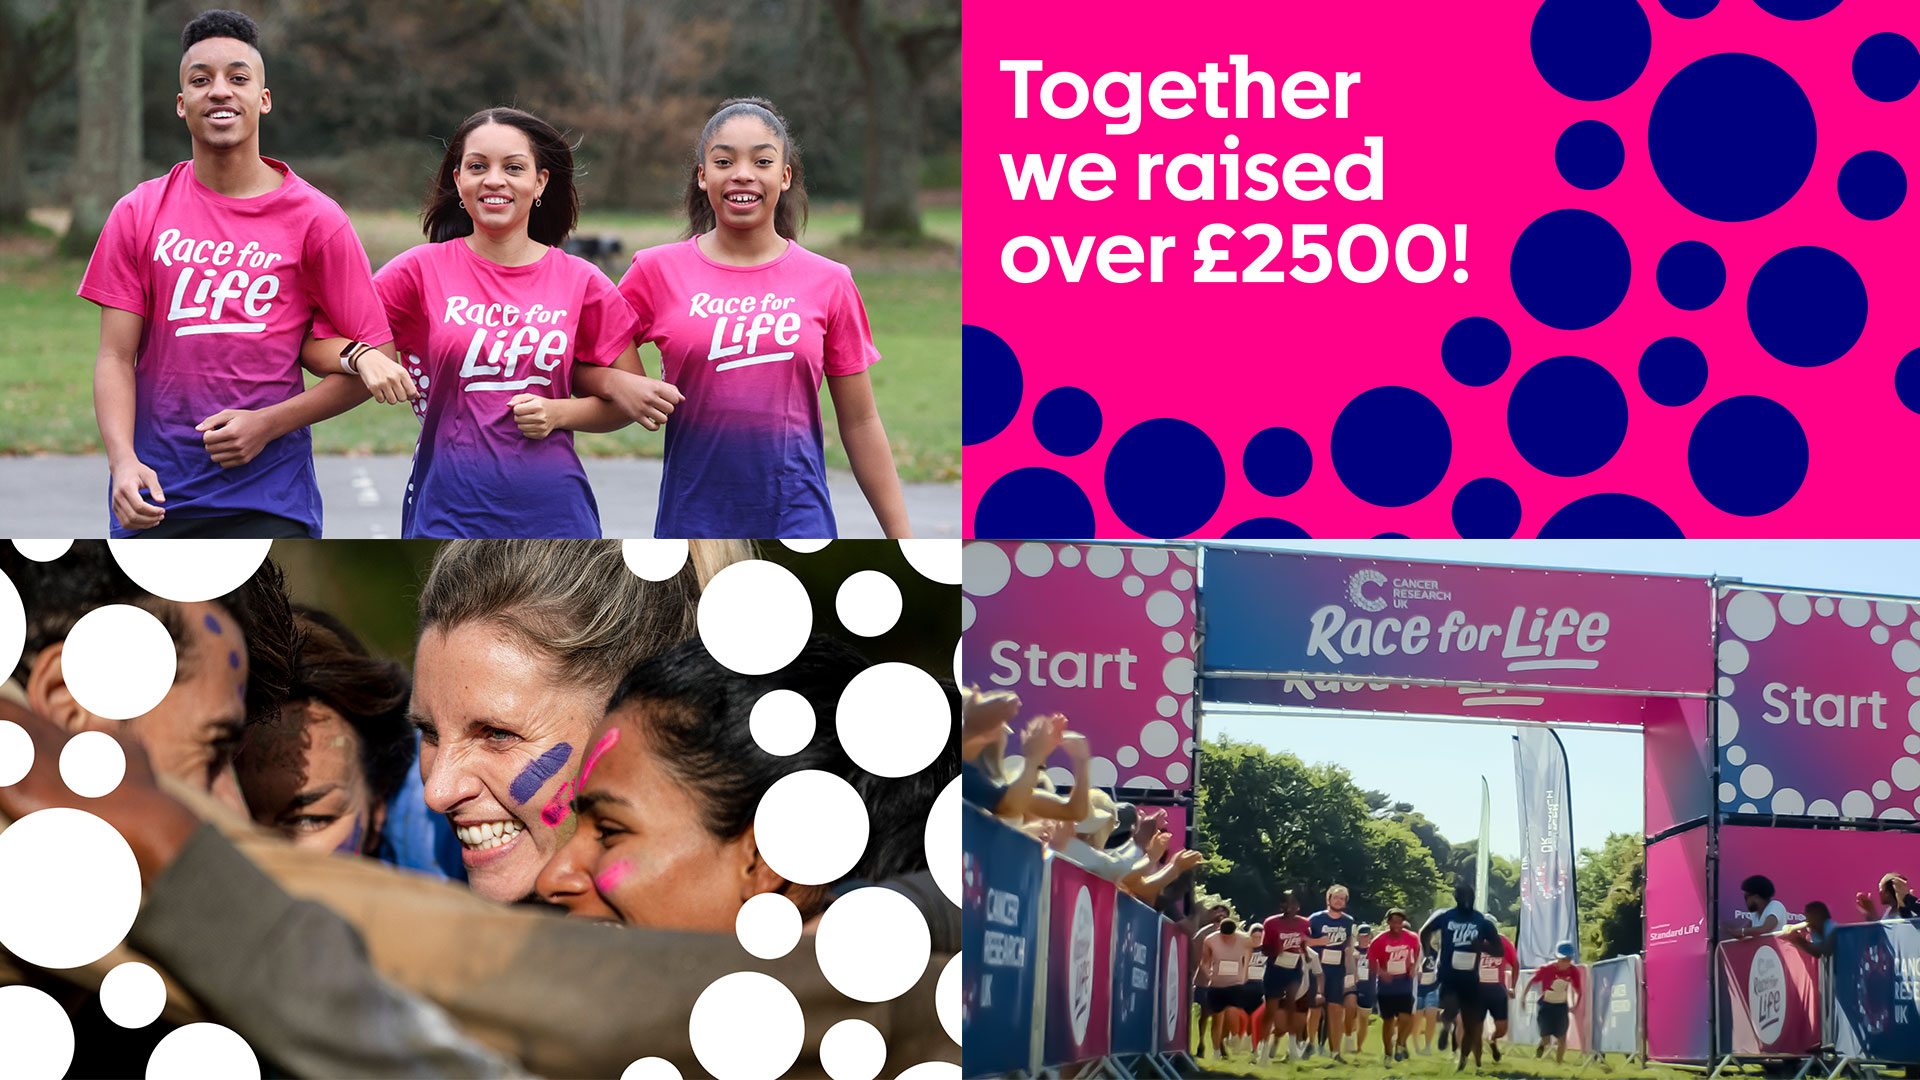 Grid of four images with three people in Race for Life t-shirts, a pink and blue graphic with 'Together we raised over £2500!' text, a white woman with face paint and the Race for Life start line with people crossing over it.